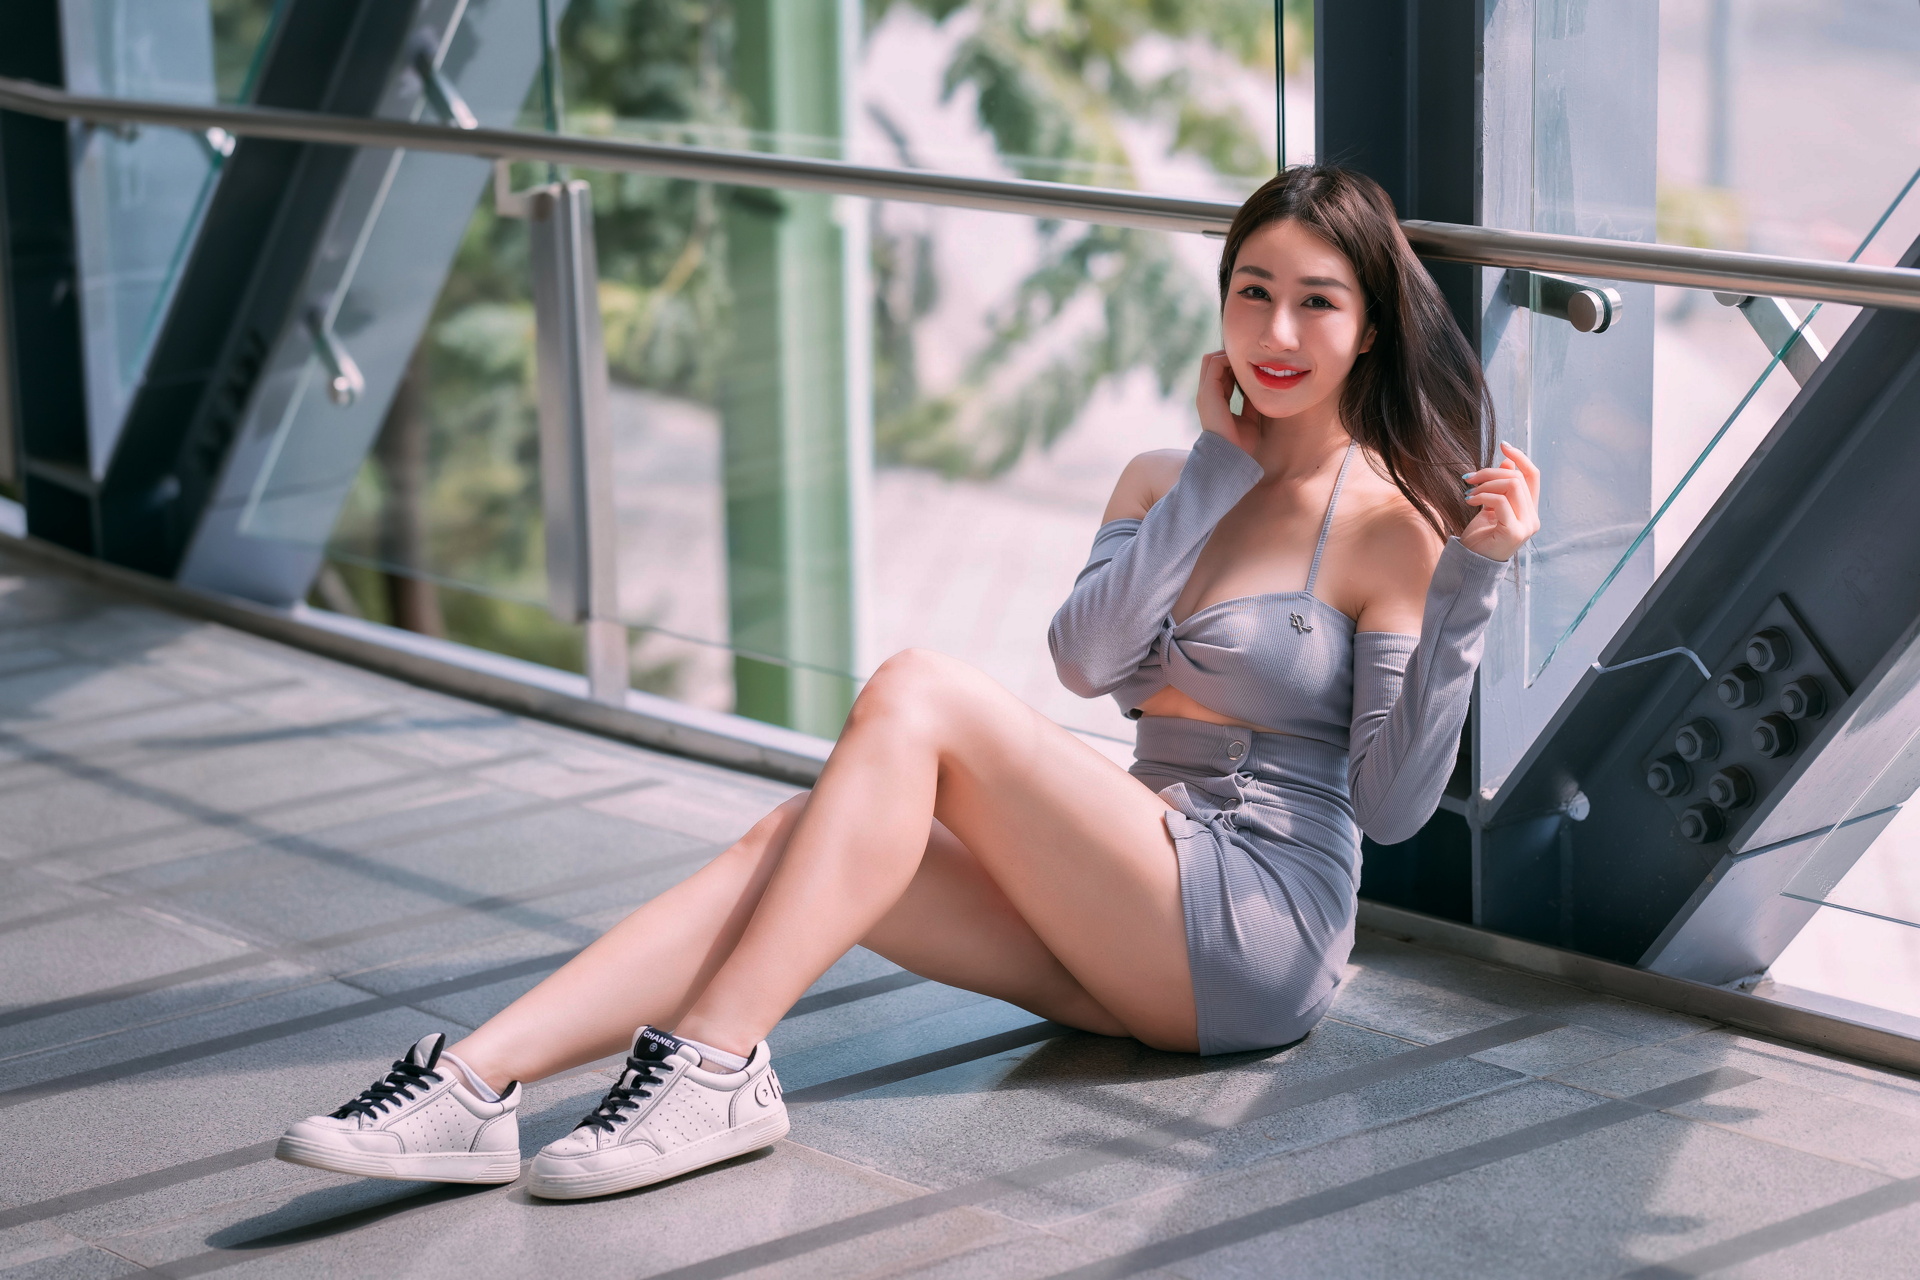 People 1920x1280 Asian model women long hair dark hair sitting grey skirt grey tops sneakers leaning iron railing window depth of field white sneakers legs socks sunlight miniskirt skirt cleavage big boobs bare shoulders smiling red lipstick on the ground looking at viewer